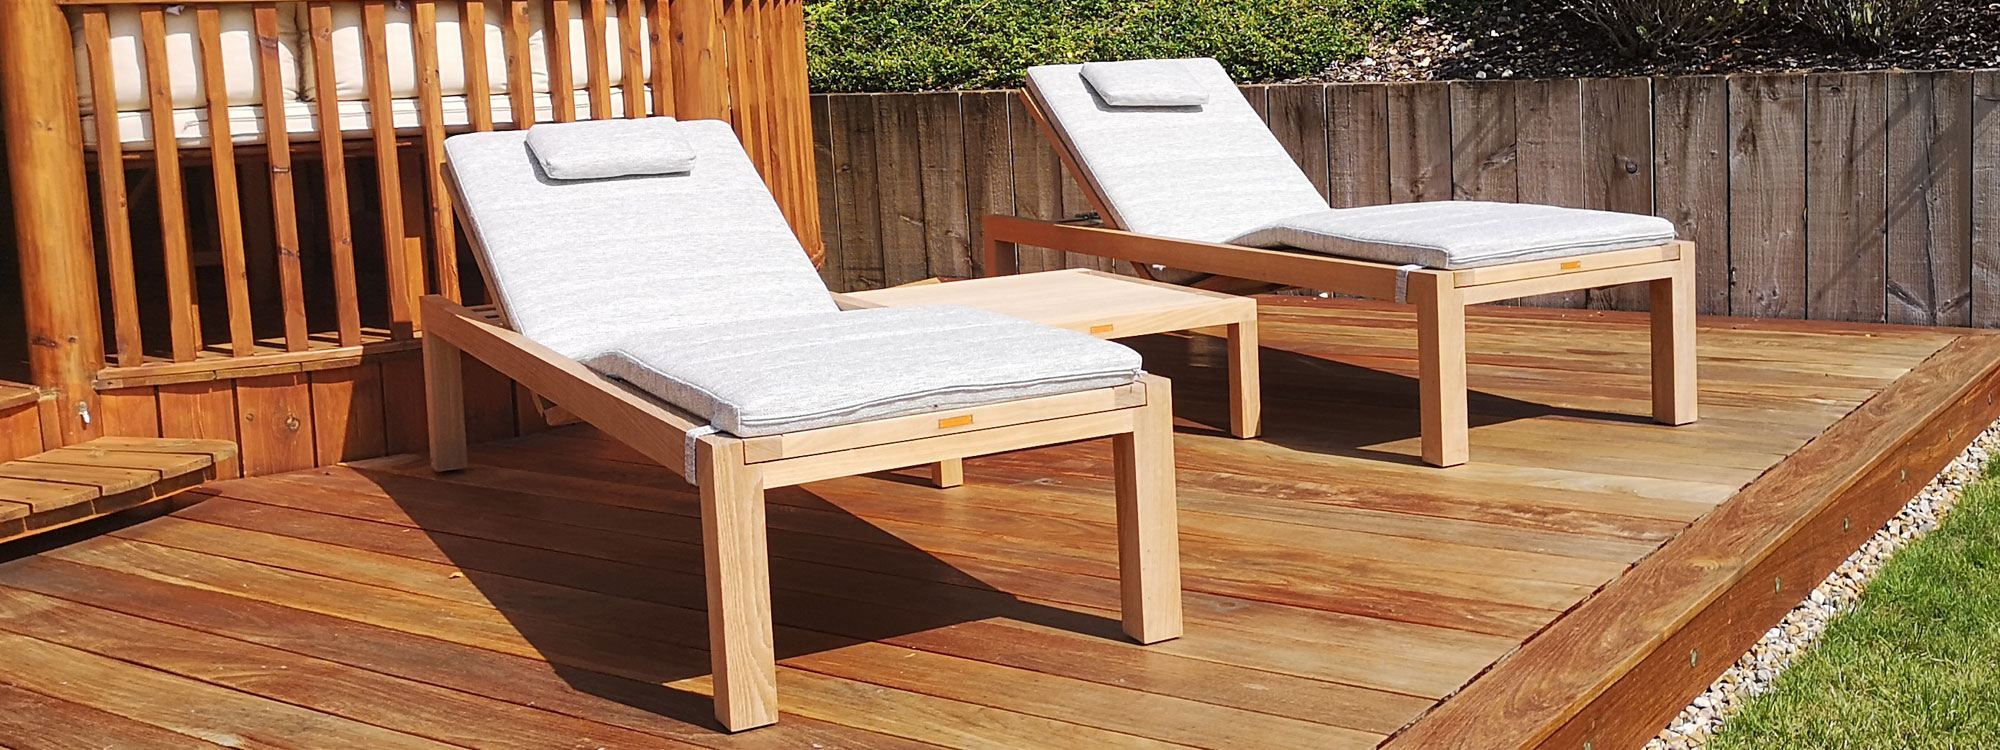 IXIT Luxury TEAK Sun Lounger - ADJUSTABLE Sun Beds In HIGH QUALITY Garden Furniture MATERIALS By ROYAL BOTANIA Garden Furniture Company.